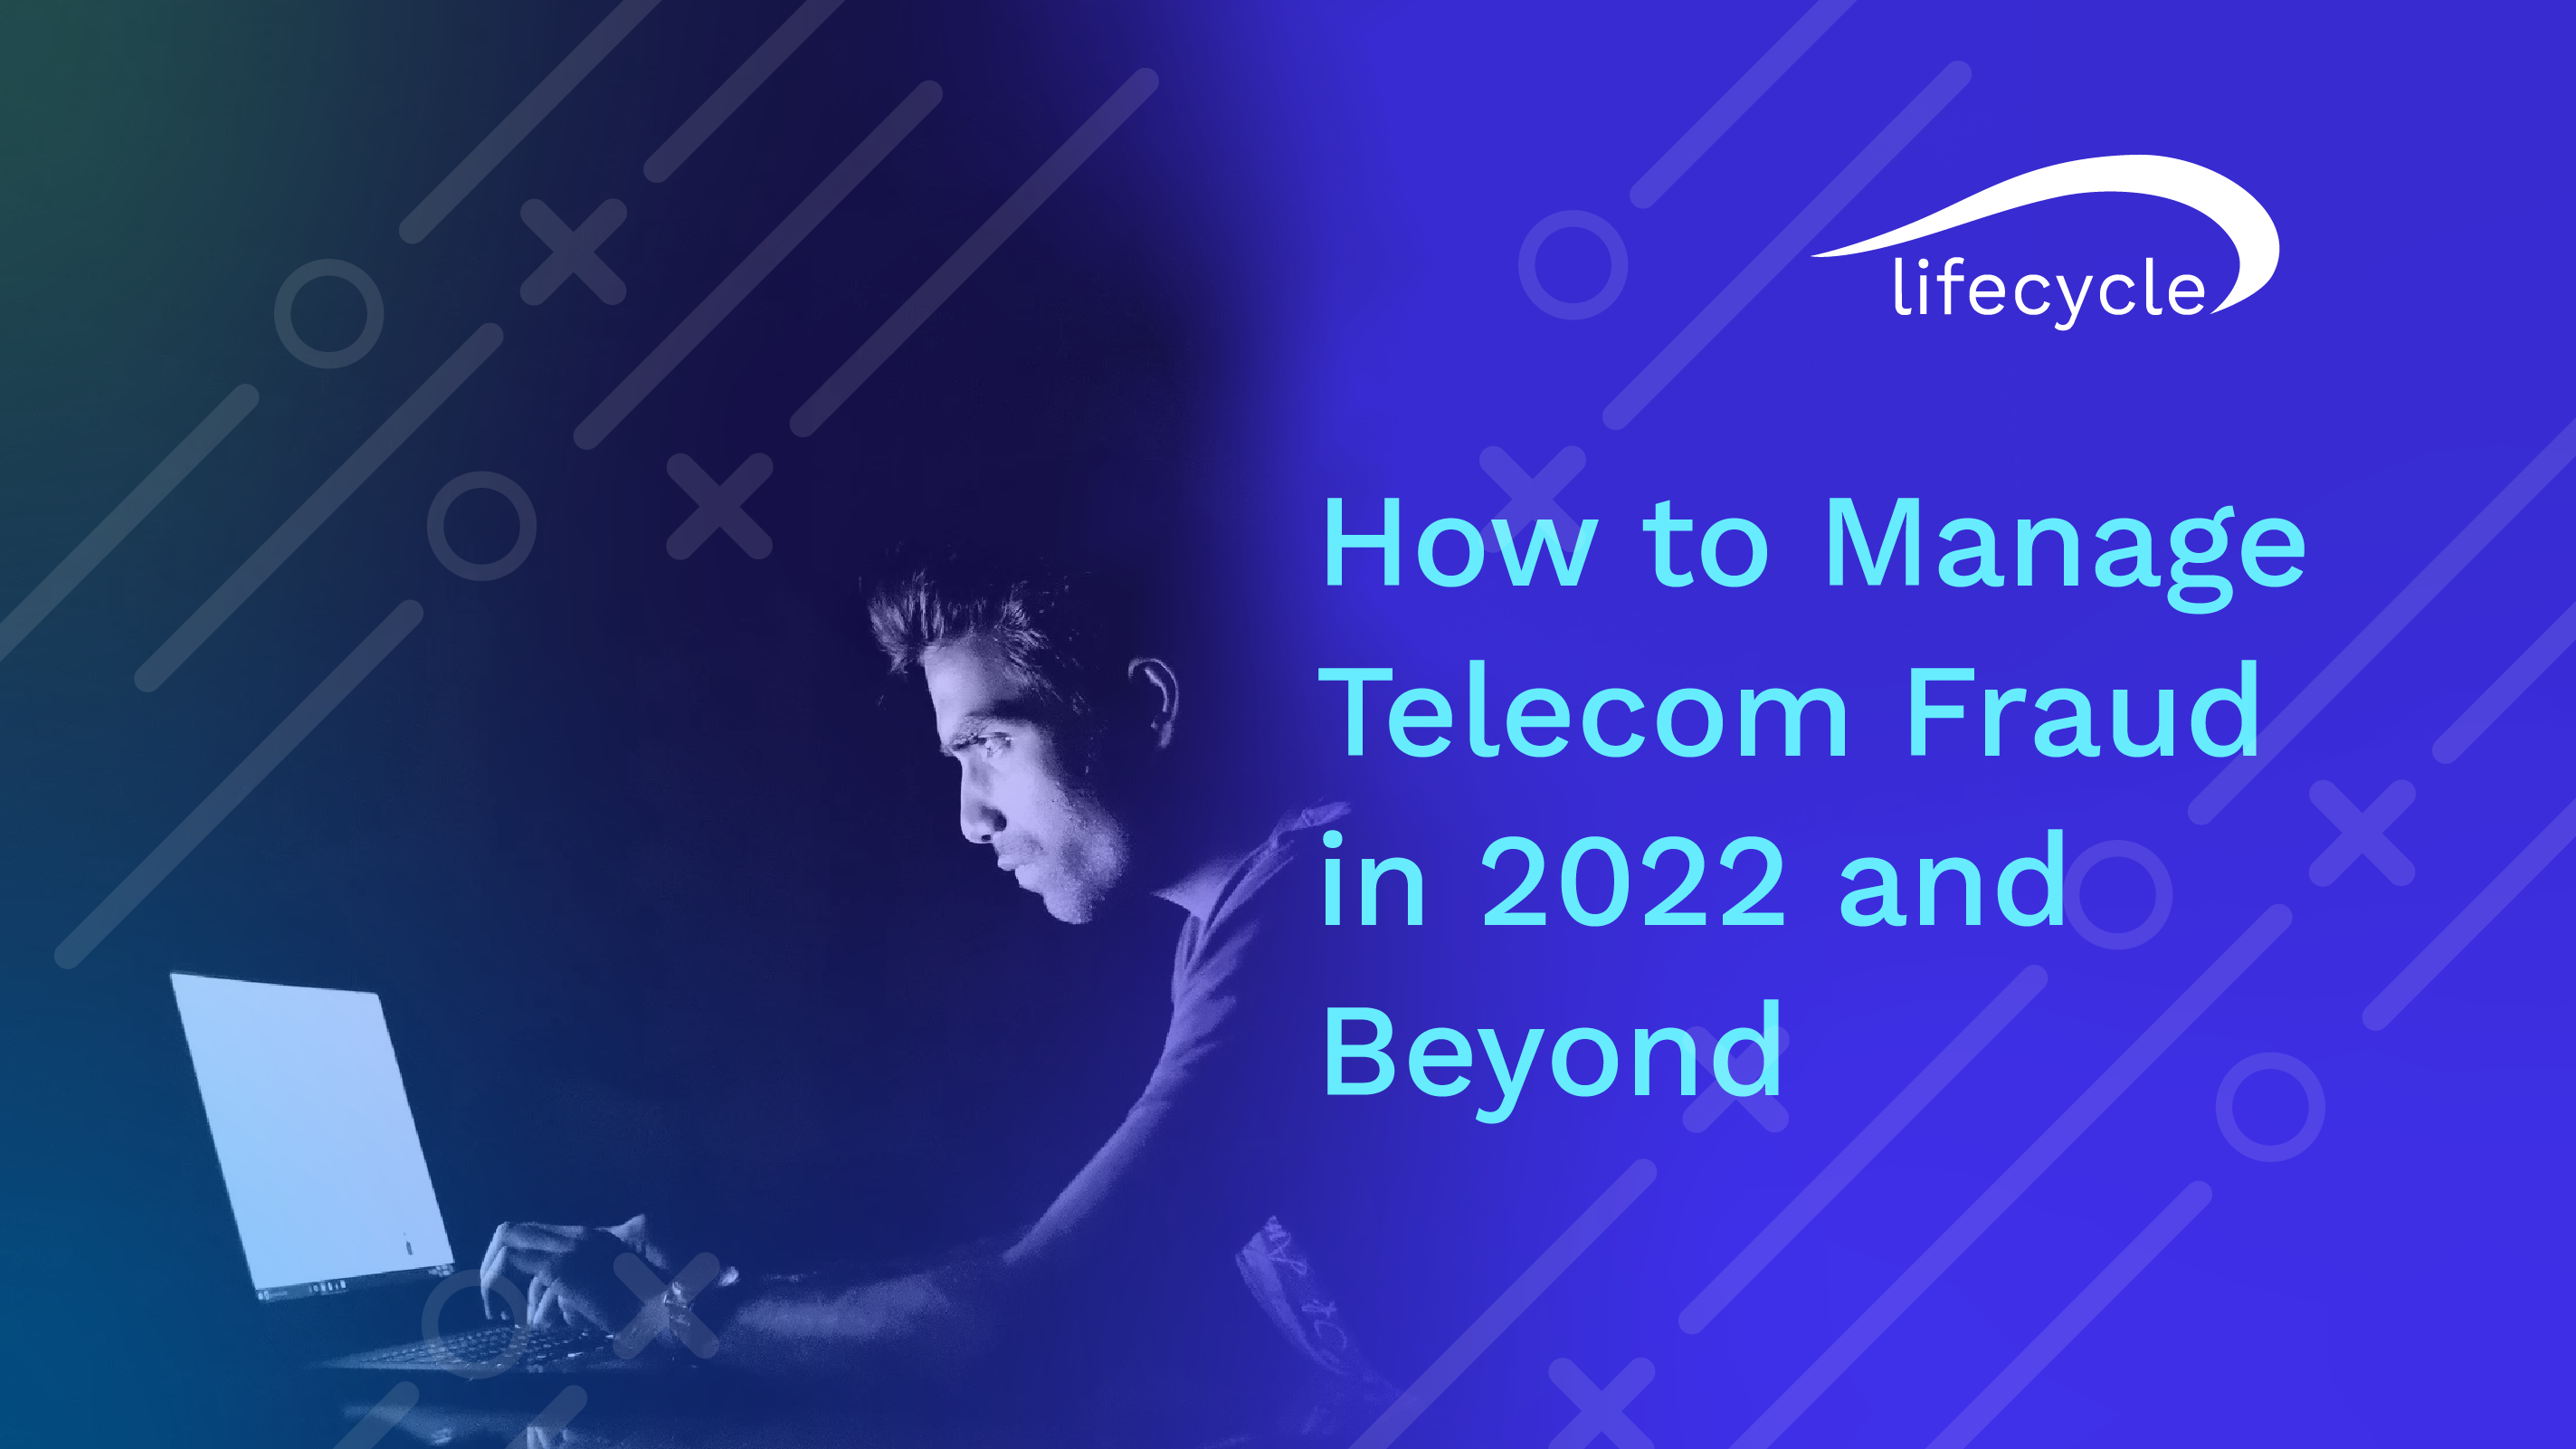 How to Manage Telecom Fraud in 2022 and Beyond